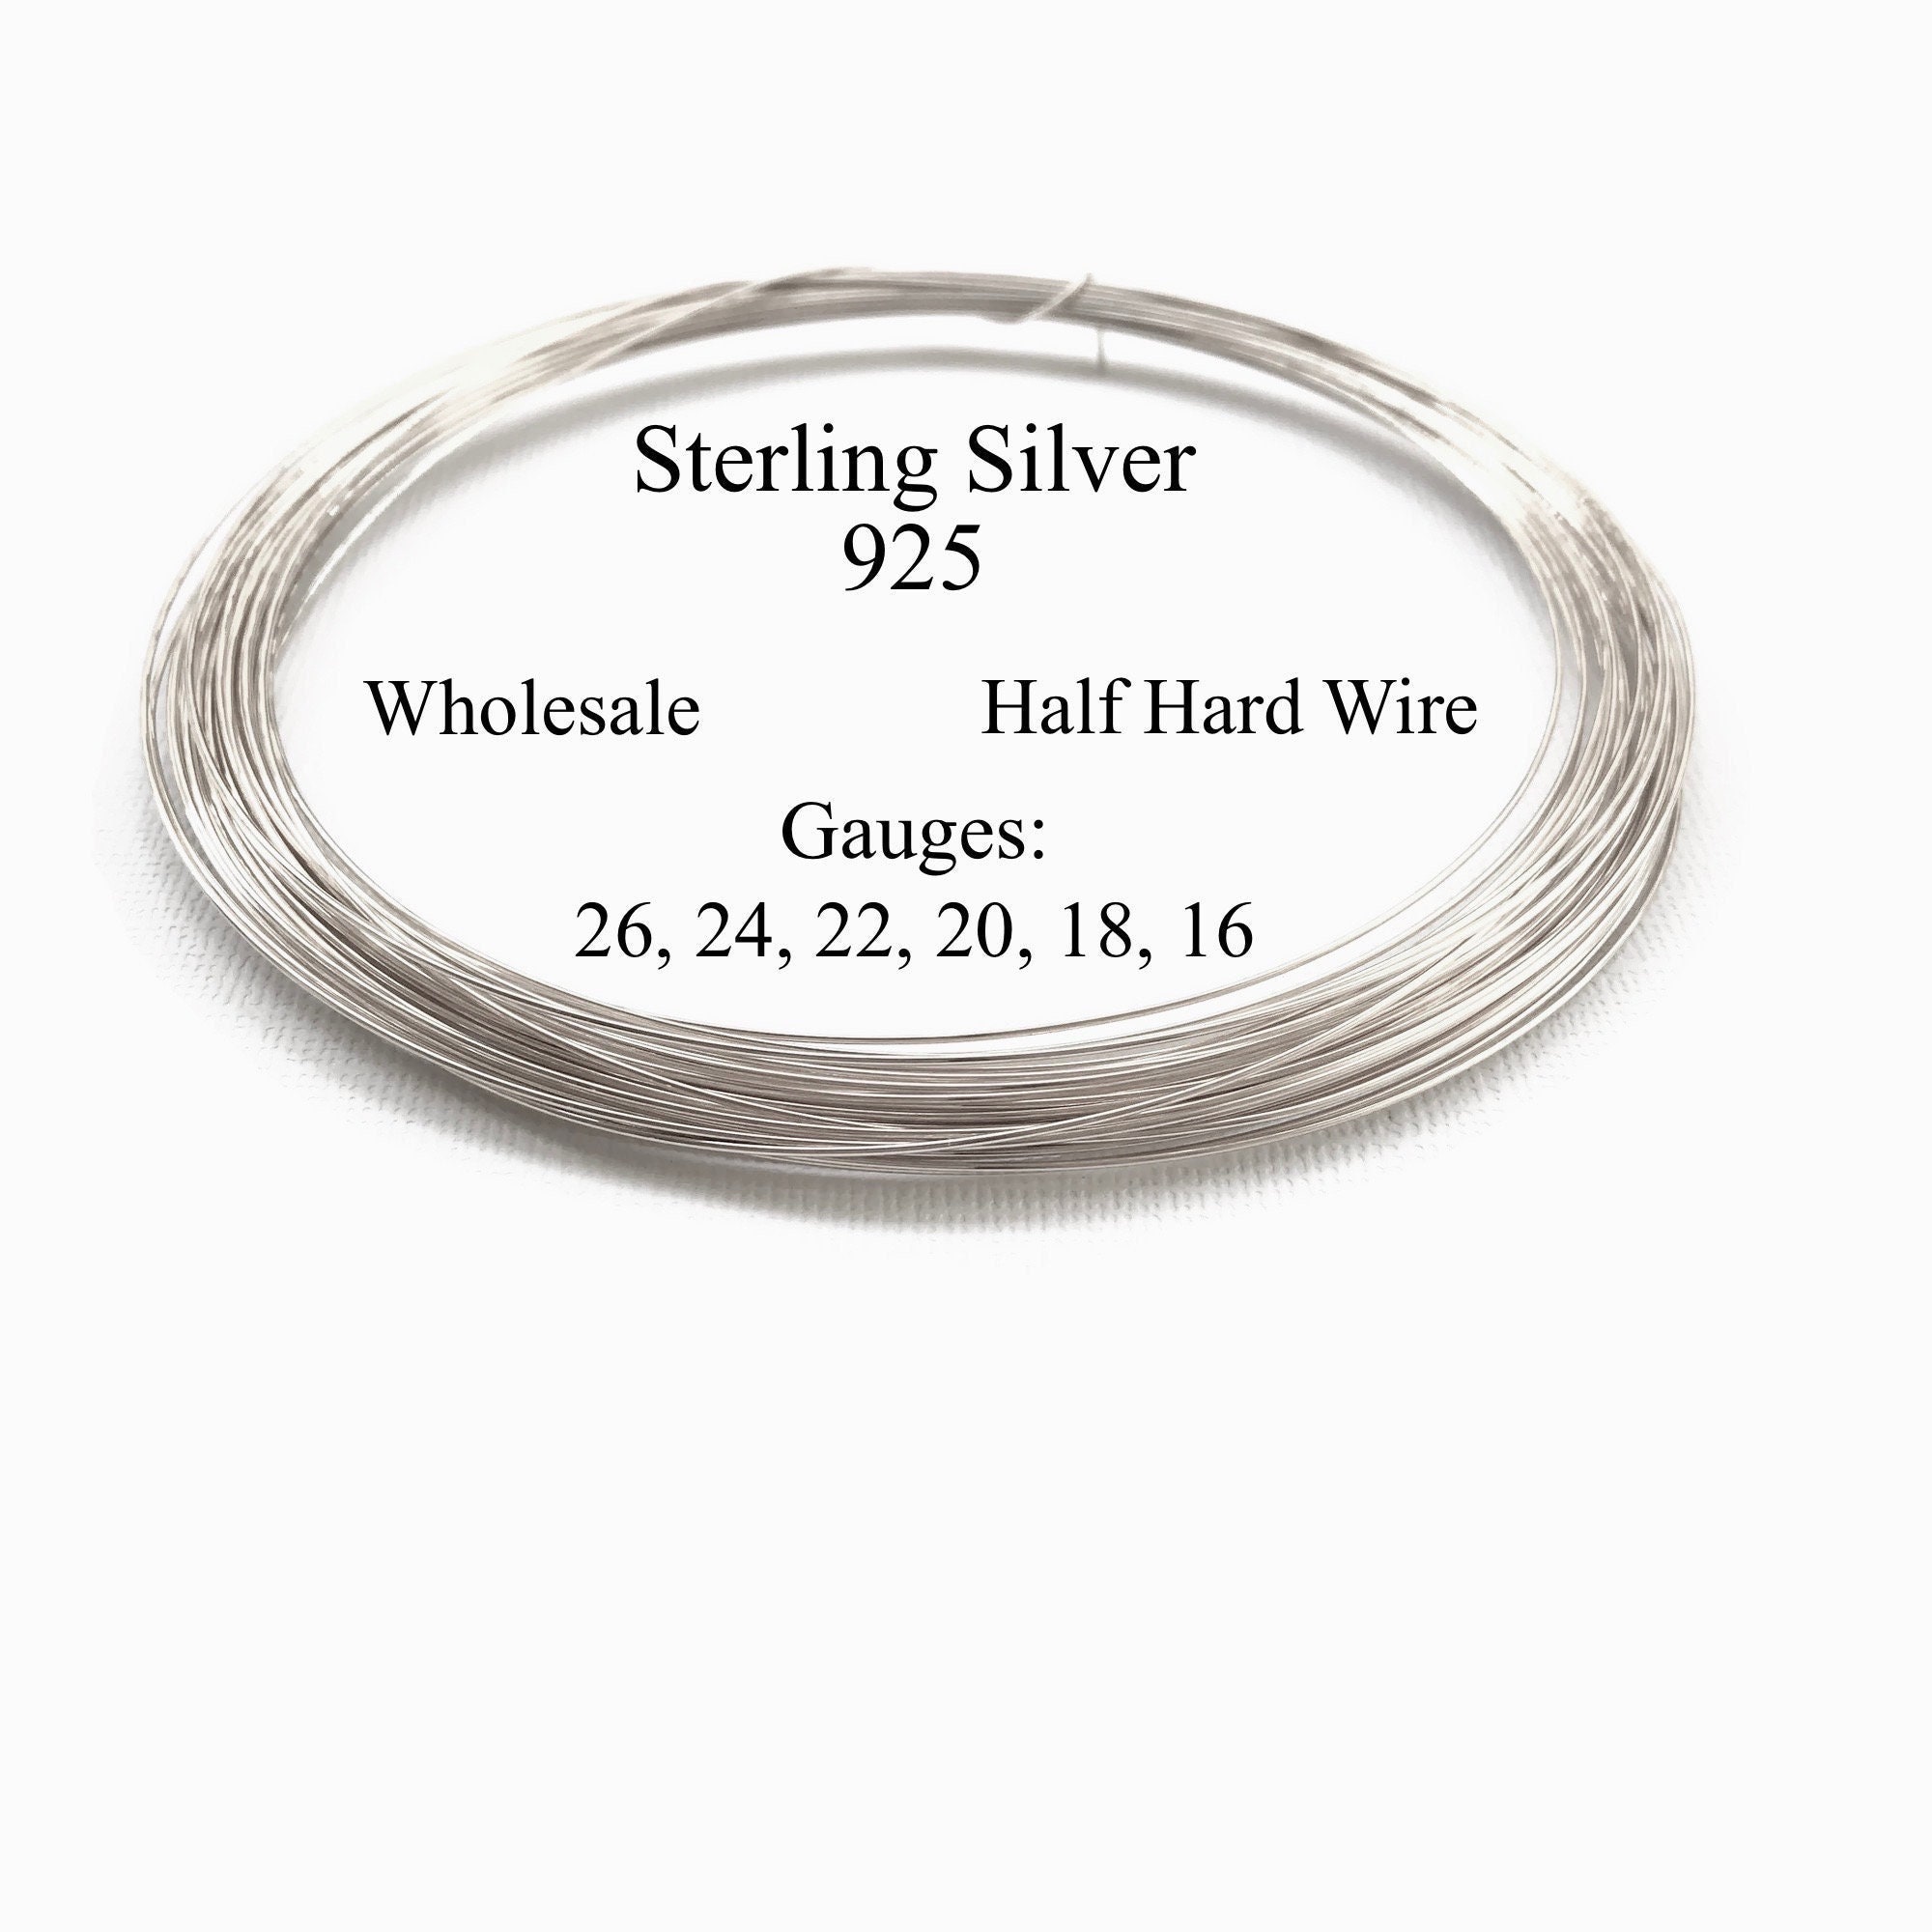 baixikly 3 rolls 18 gauge wire for jewelry making beading wire for jewelry  making silver wire